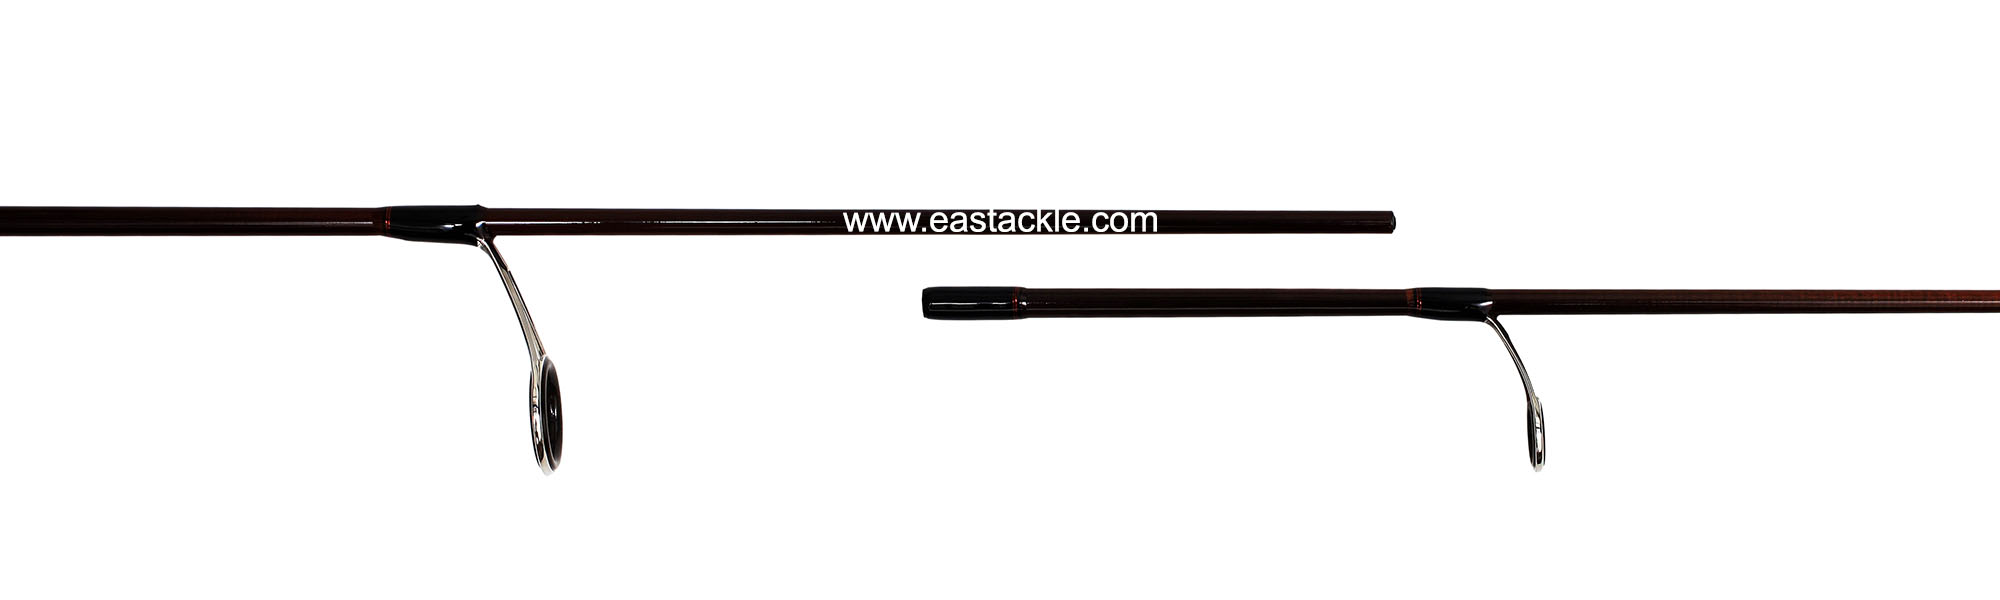 Storm - Discovery - DVS602L - Spinning Rod - Joint Section (Side View) | Eastackle